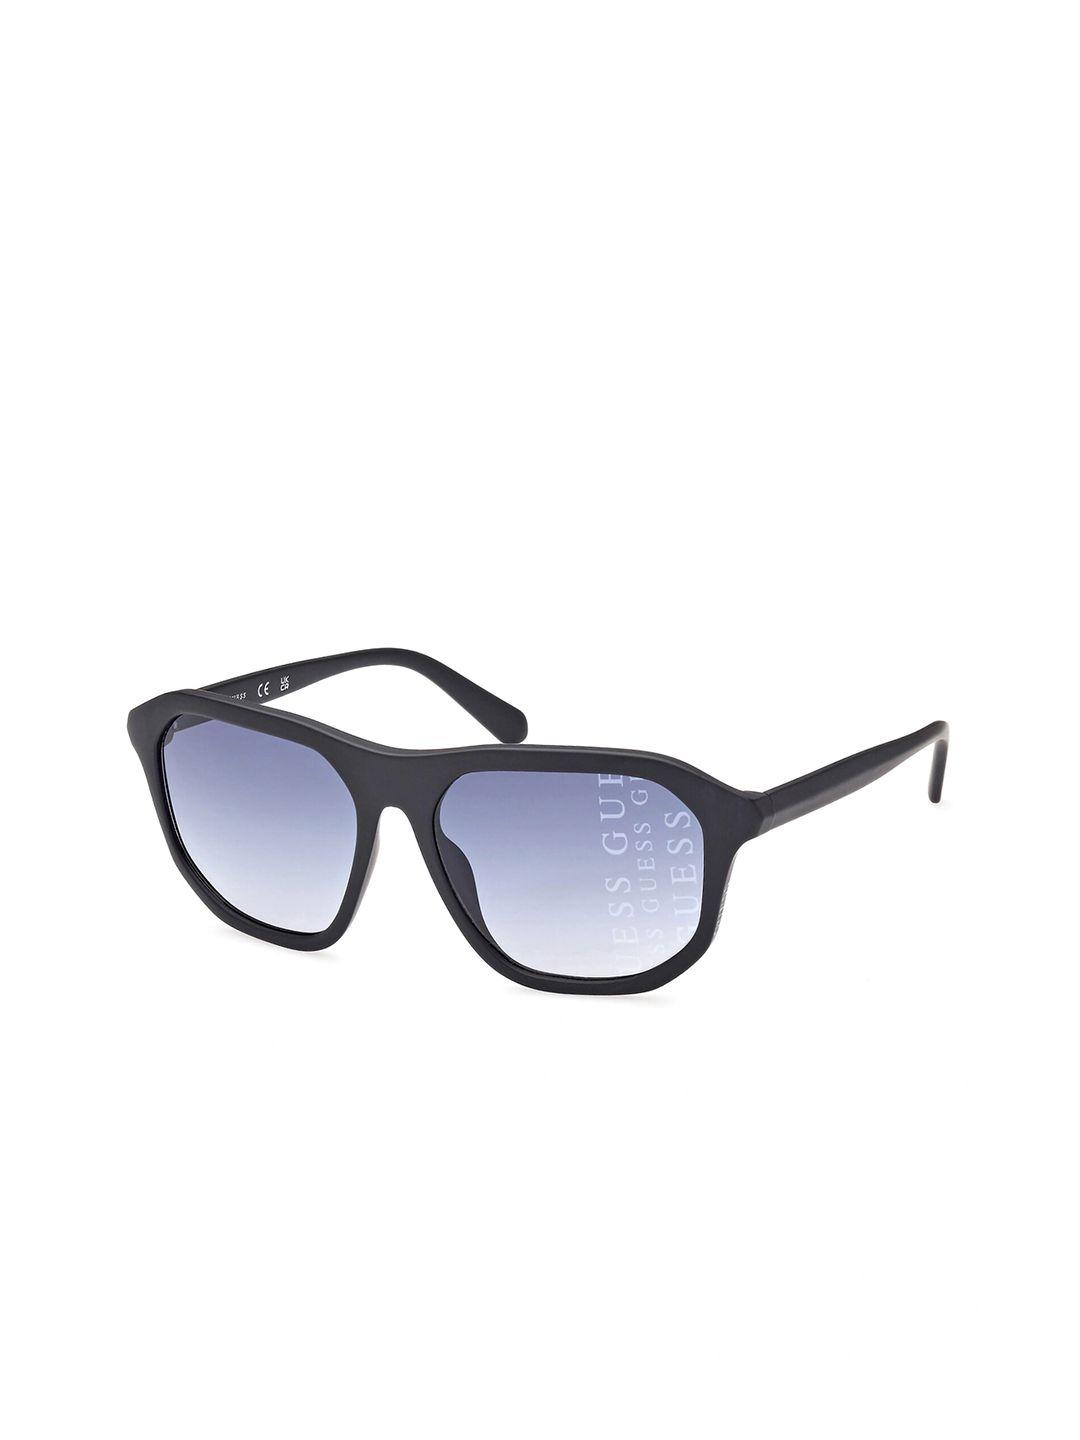 guess-men-square-sunglasses-with-uv-protected-lens